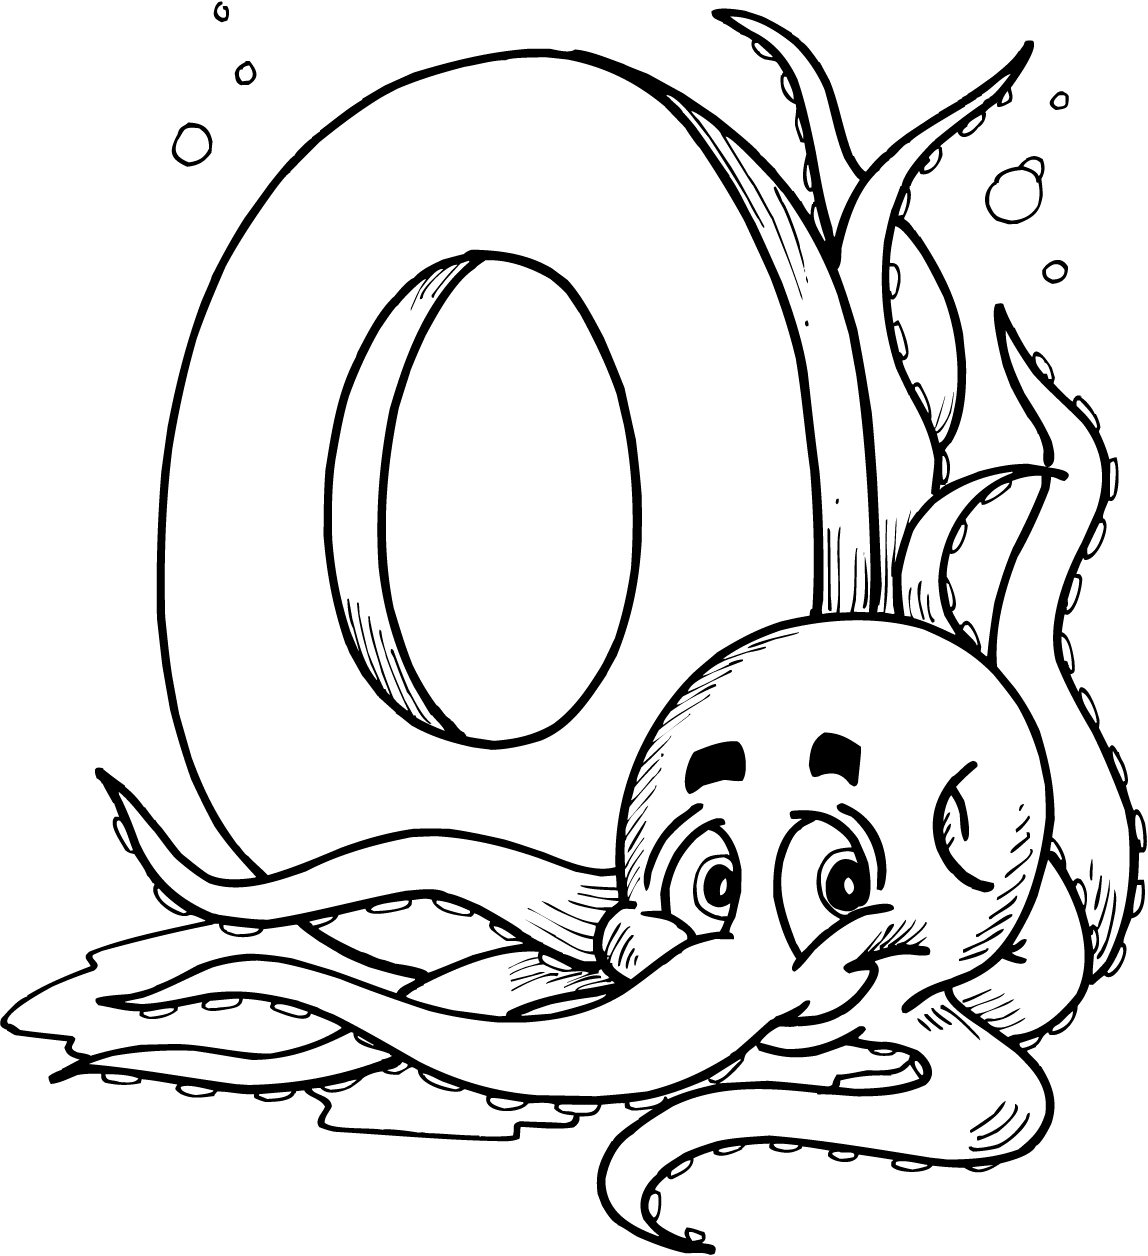 Letter O Coloring Pages Printable Image